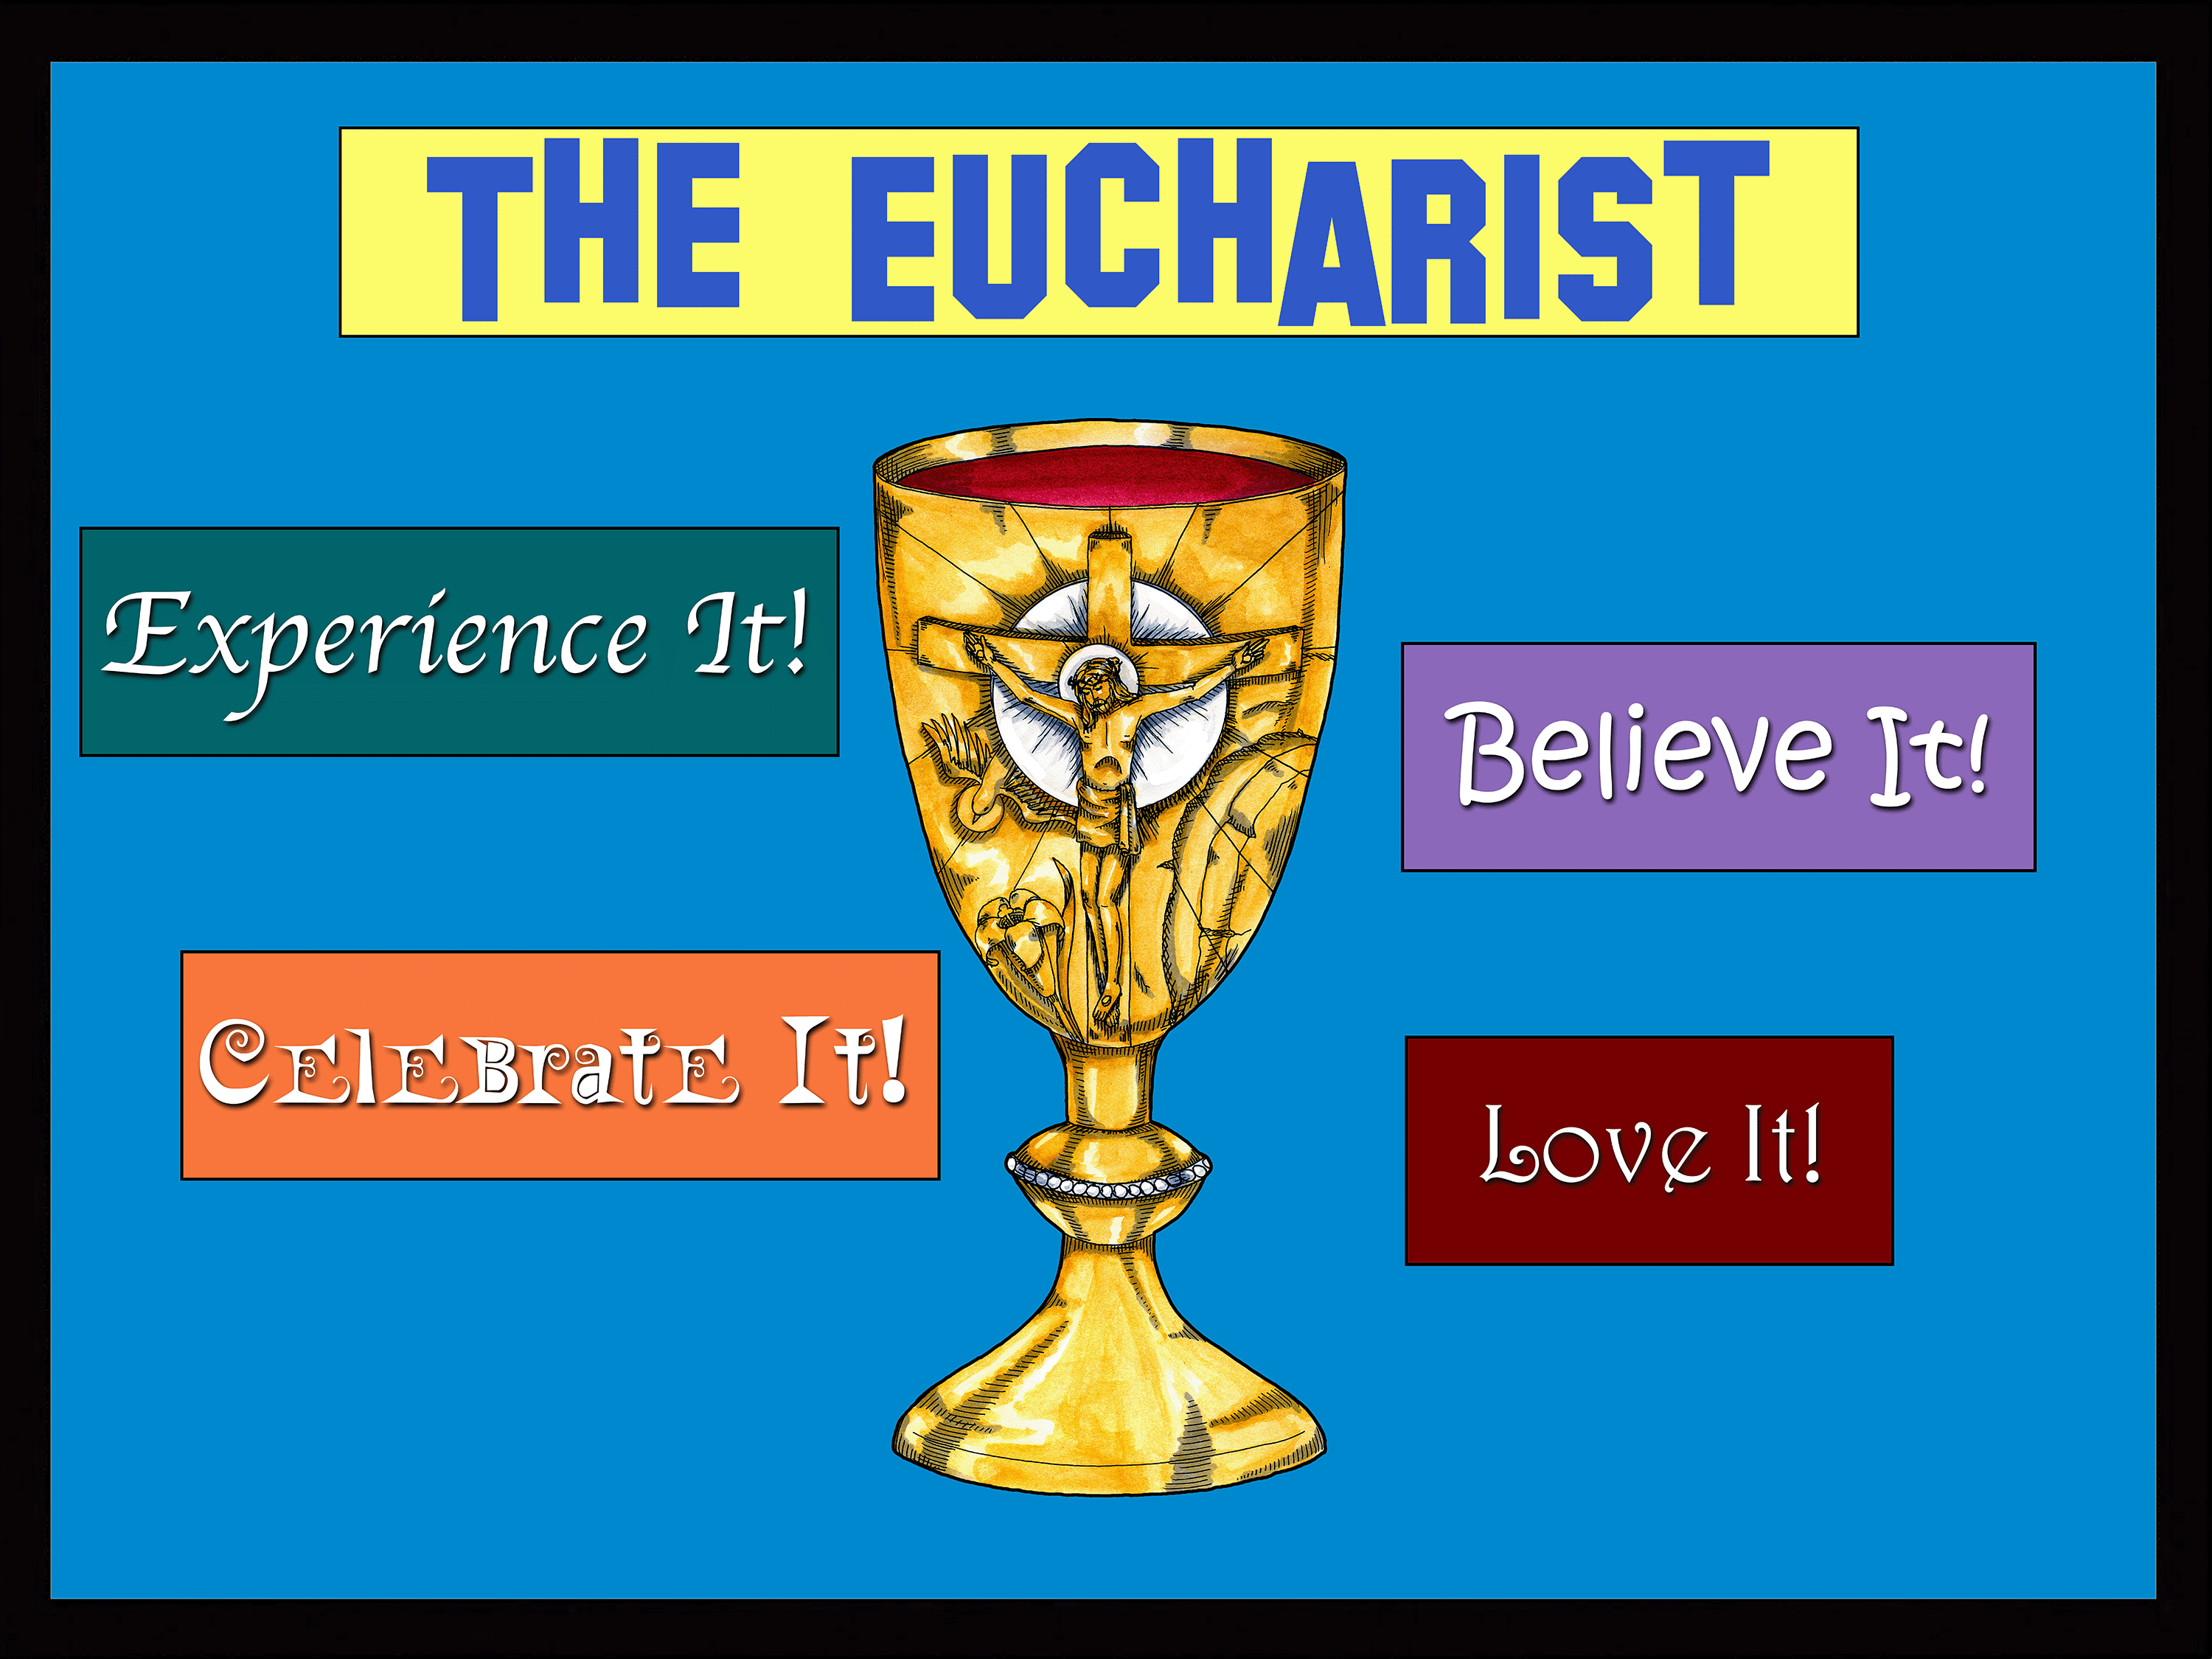 Holy Sparks - The Eucharist